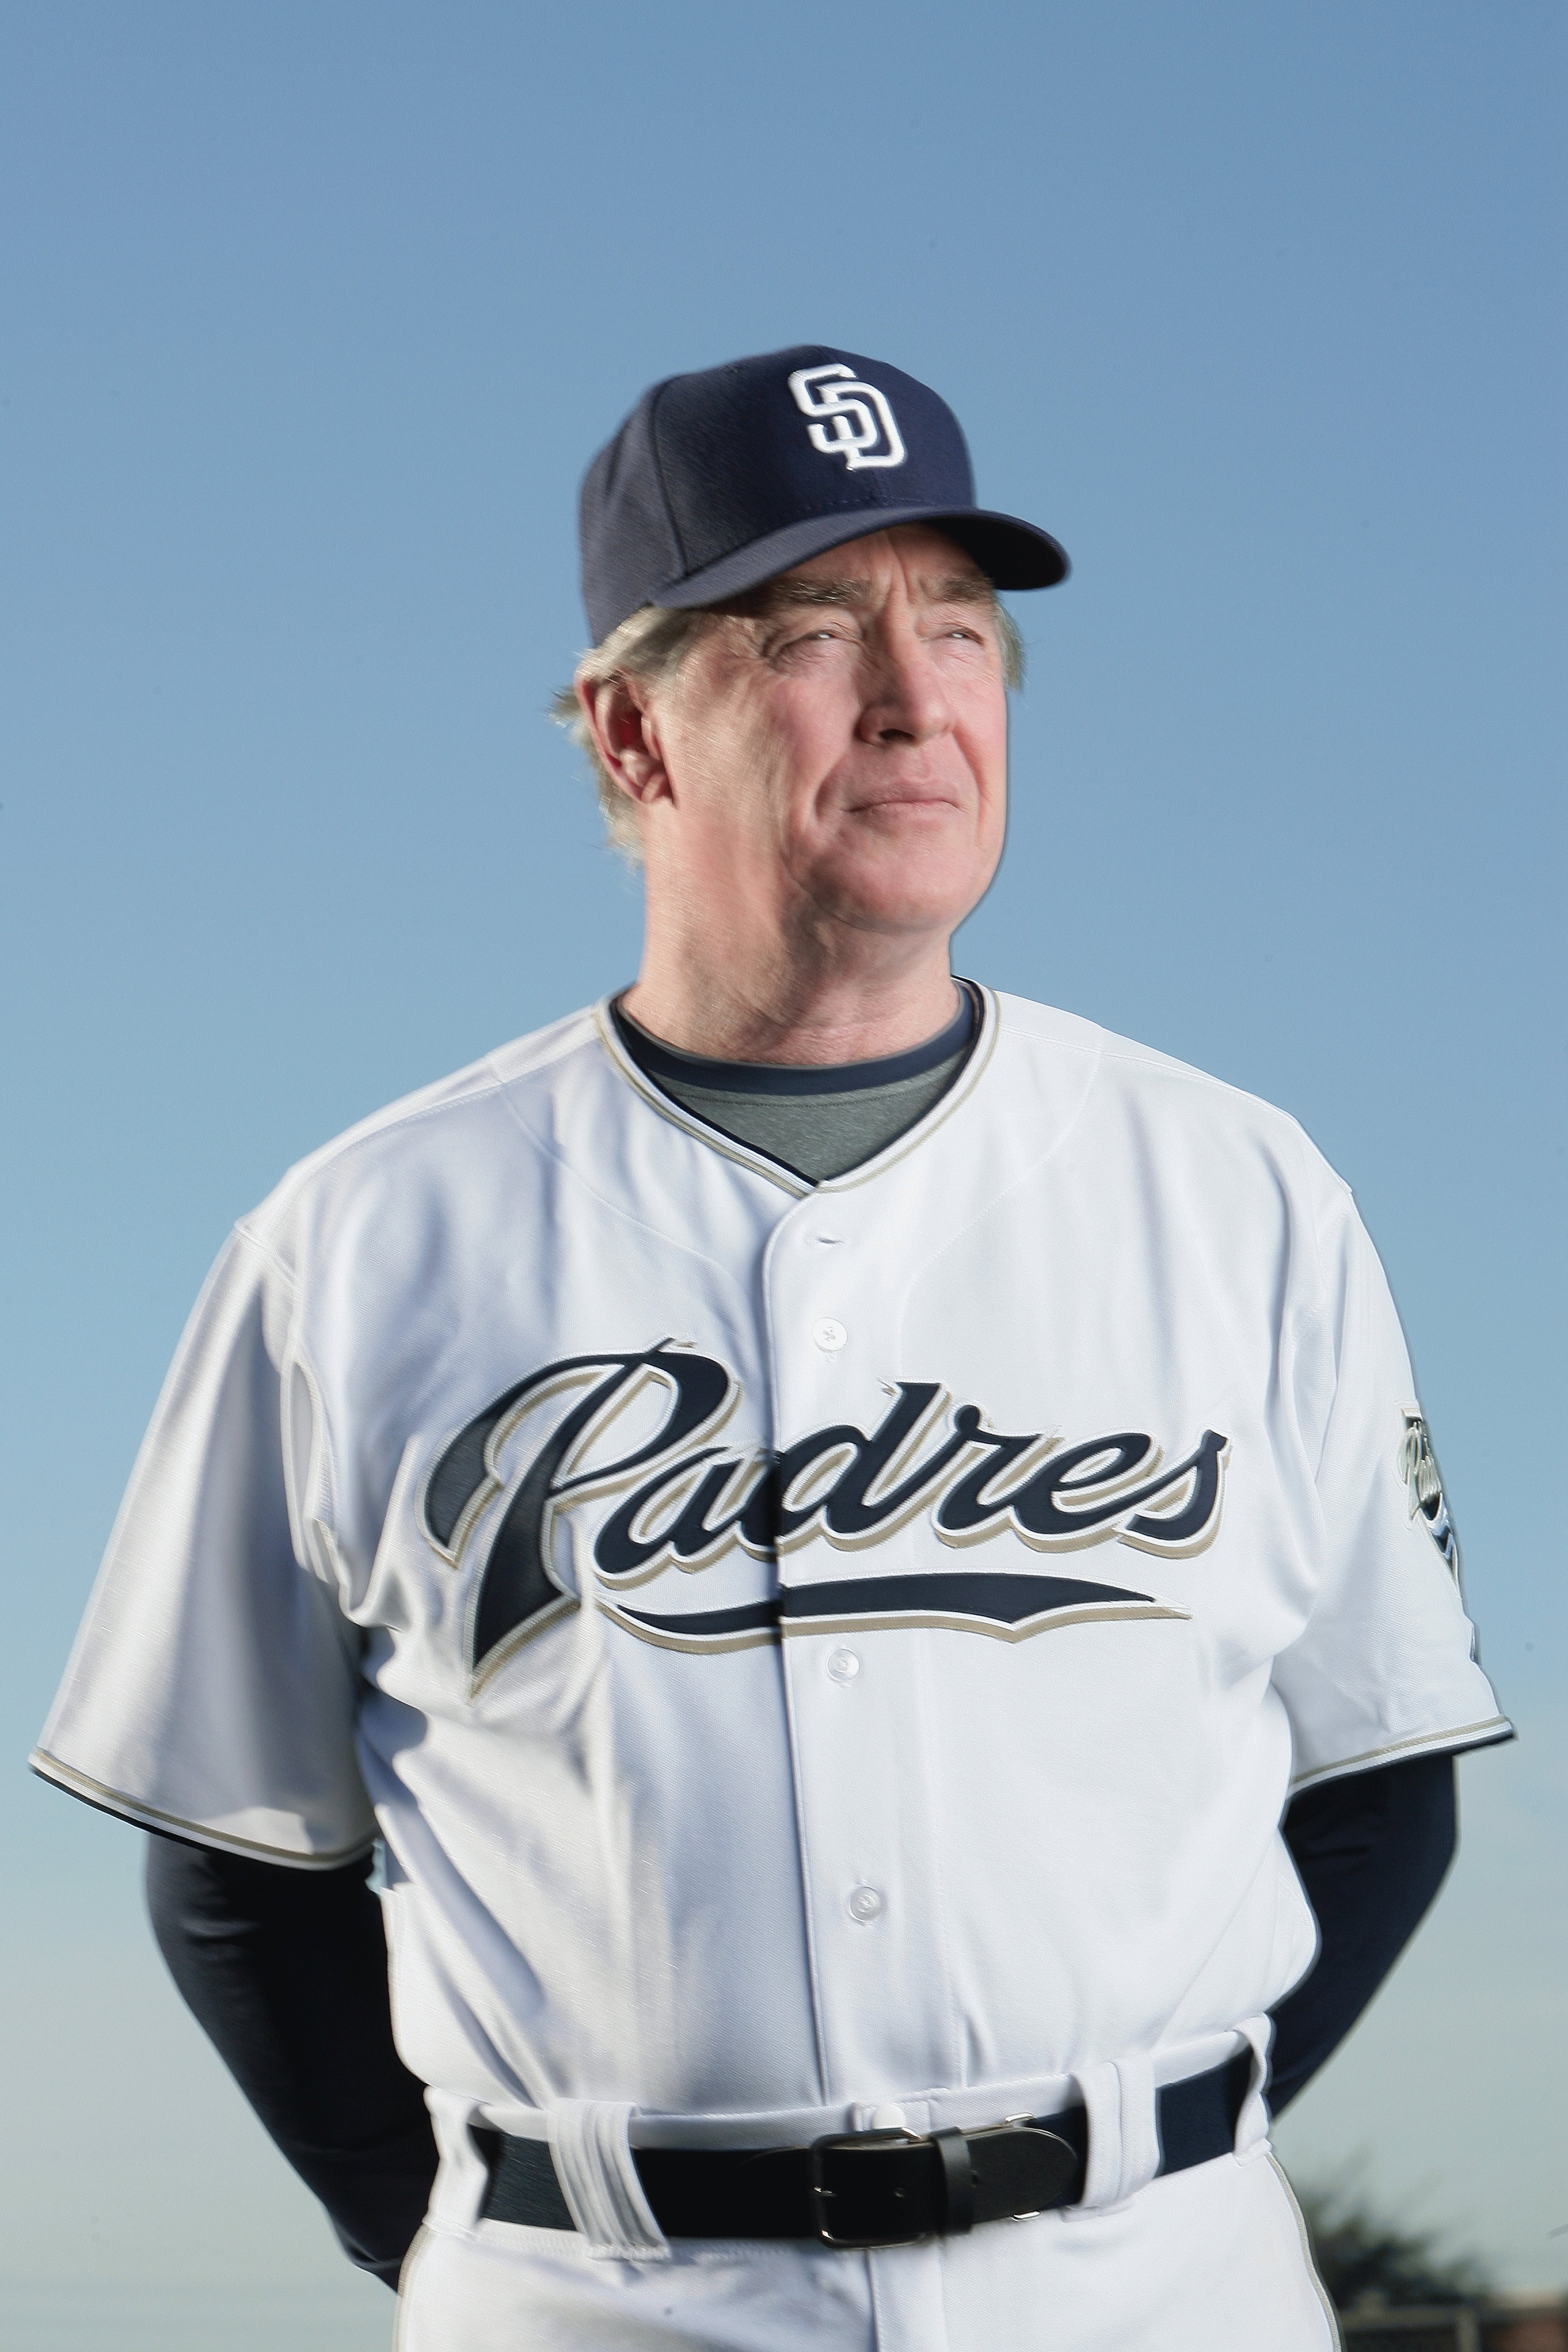 PEORIA, AZ - FEBRUARY 24:  Bench coach Ted Simmons of the San Diego Padres poses during photo day at Peoria Stadium on February 24, 2009 in Peoria, Arizona. (Photo by Donald Miralle/Getty Images)